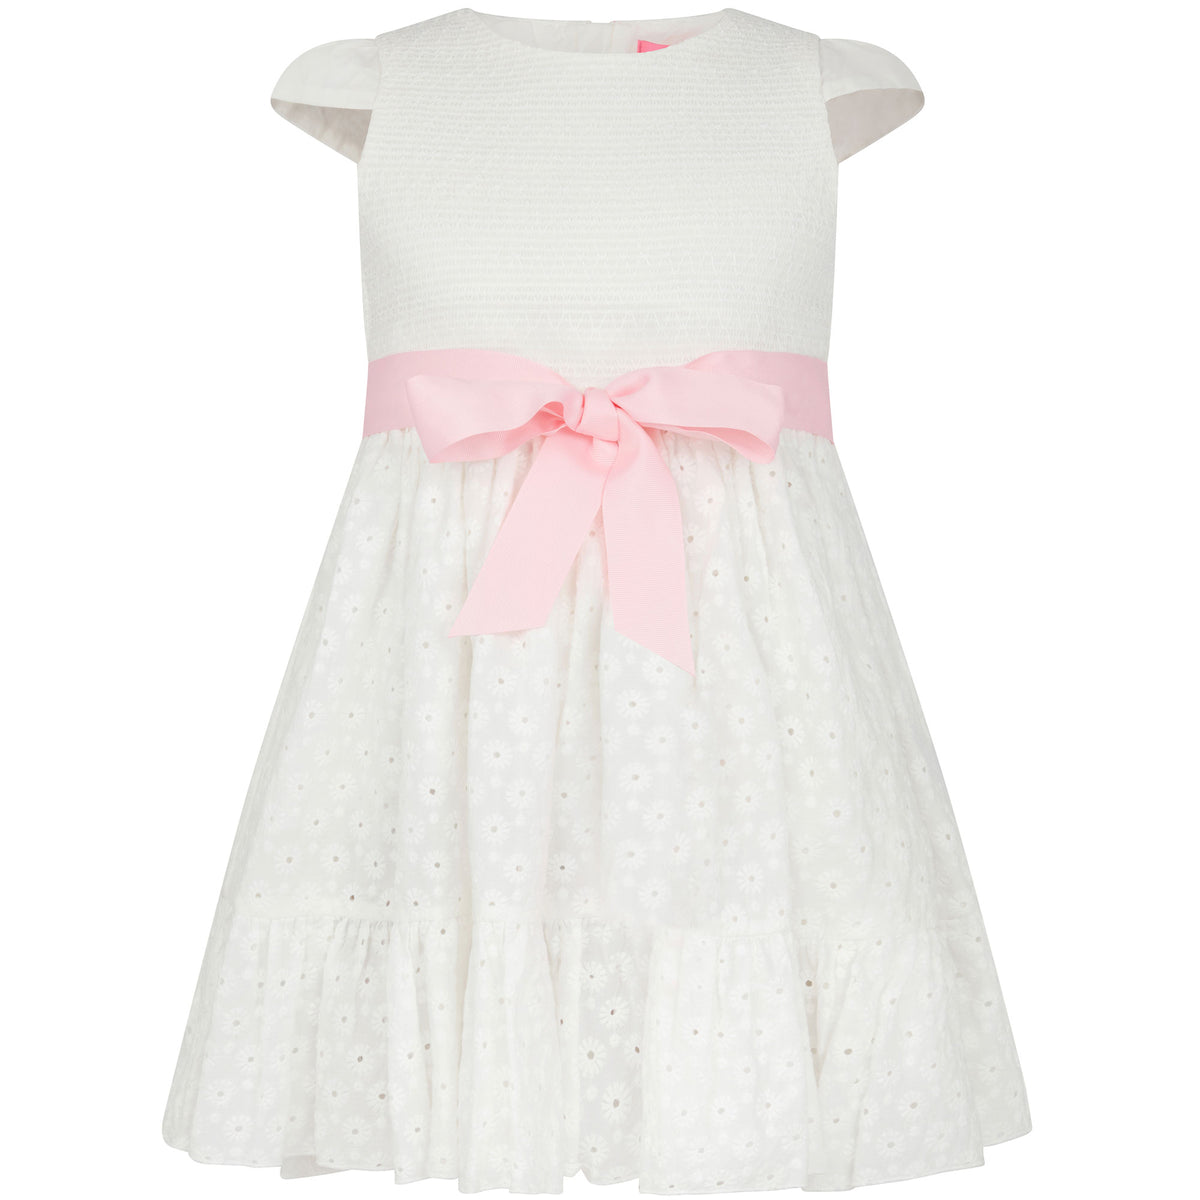 Olivia Embroidered Cotton Flower Girls Dress, White & Pink| Holly Hastie London